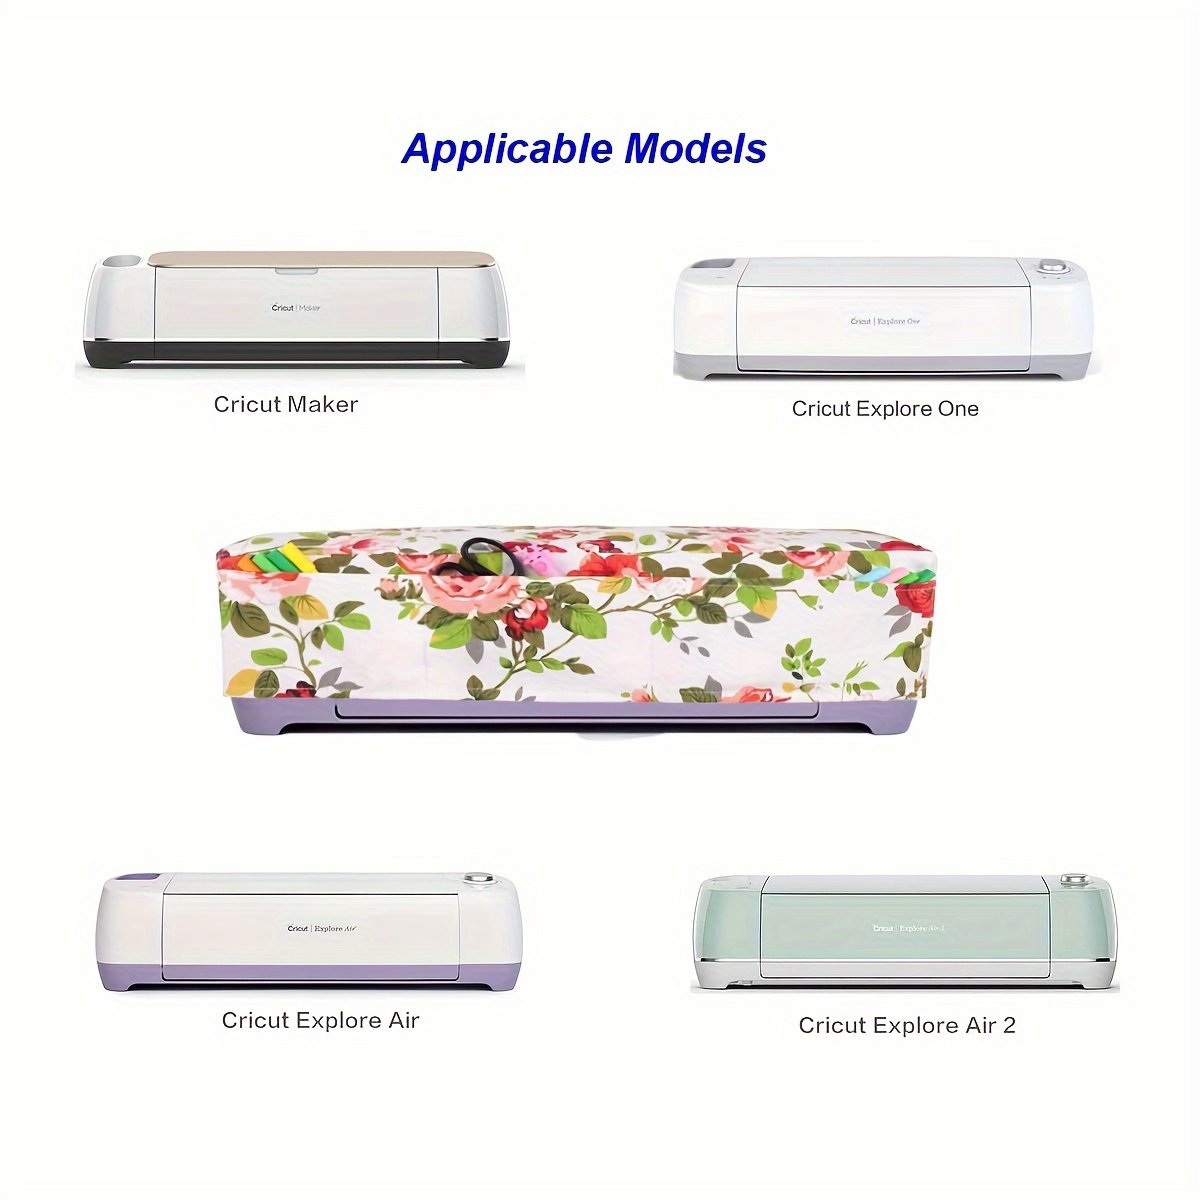 Ginsco Waterproof Dust Cover for Cricut Maker 3, Cricut Maker, Cricut  Explore Air 2, Cricut Maker Cover with 3 Front Pockets for Cricut  Accessories